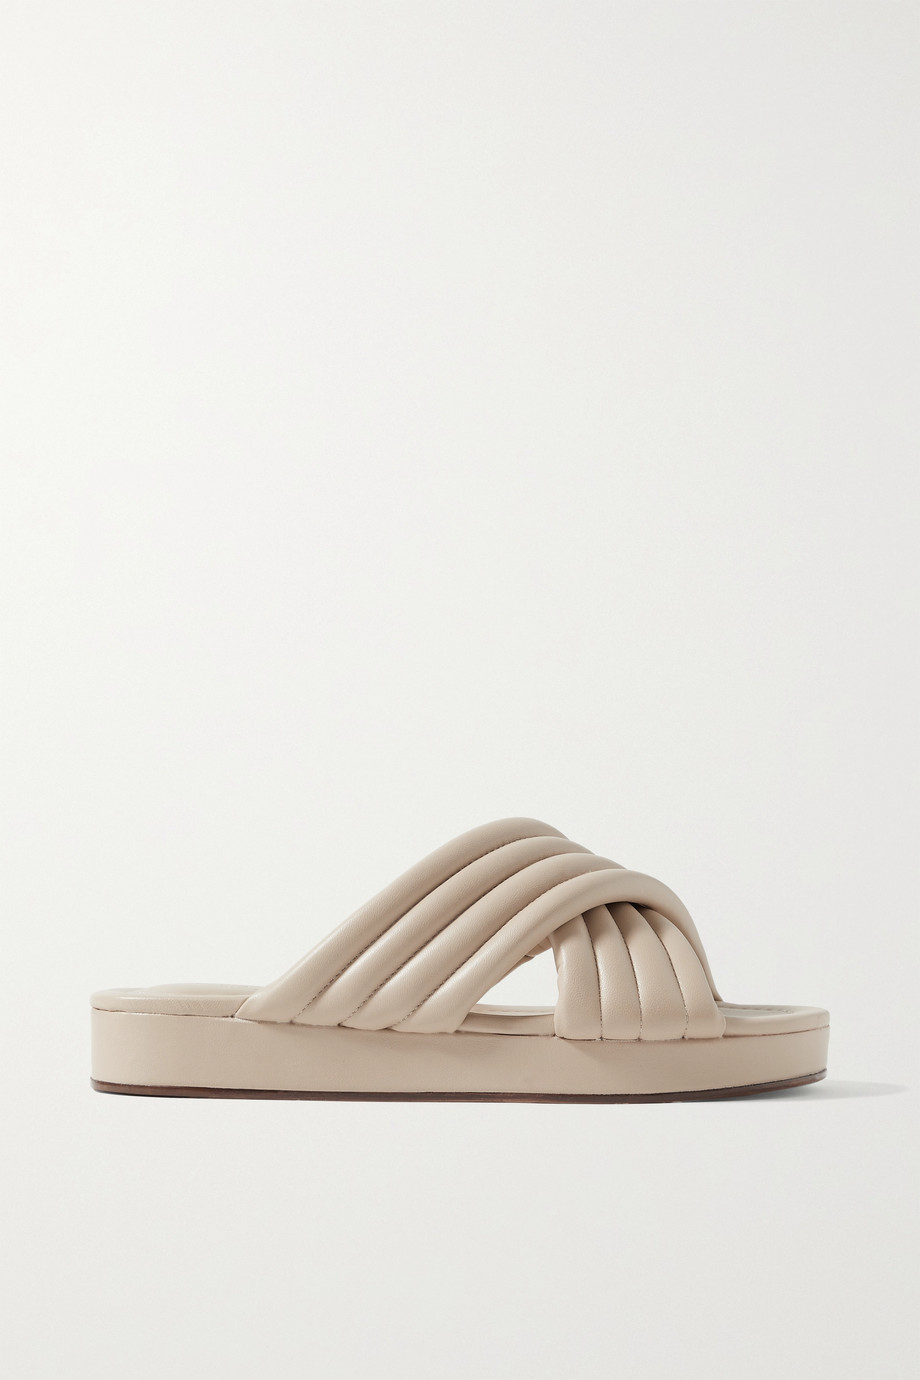 A Fashion Expert's Shopping Guide for Summer Sandals | Who What Wear UK